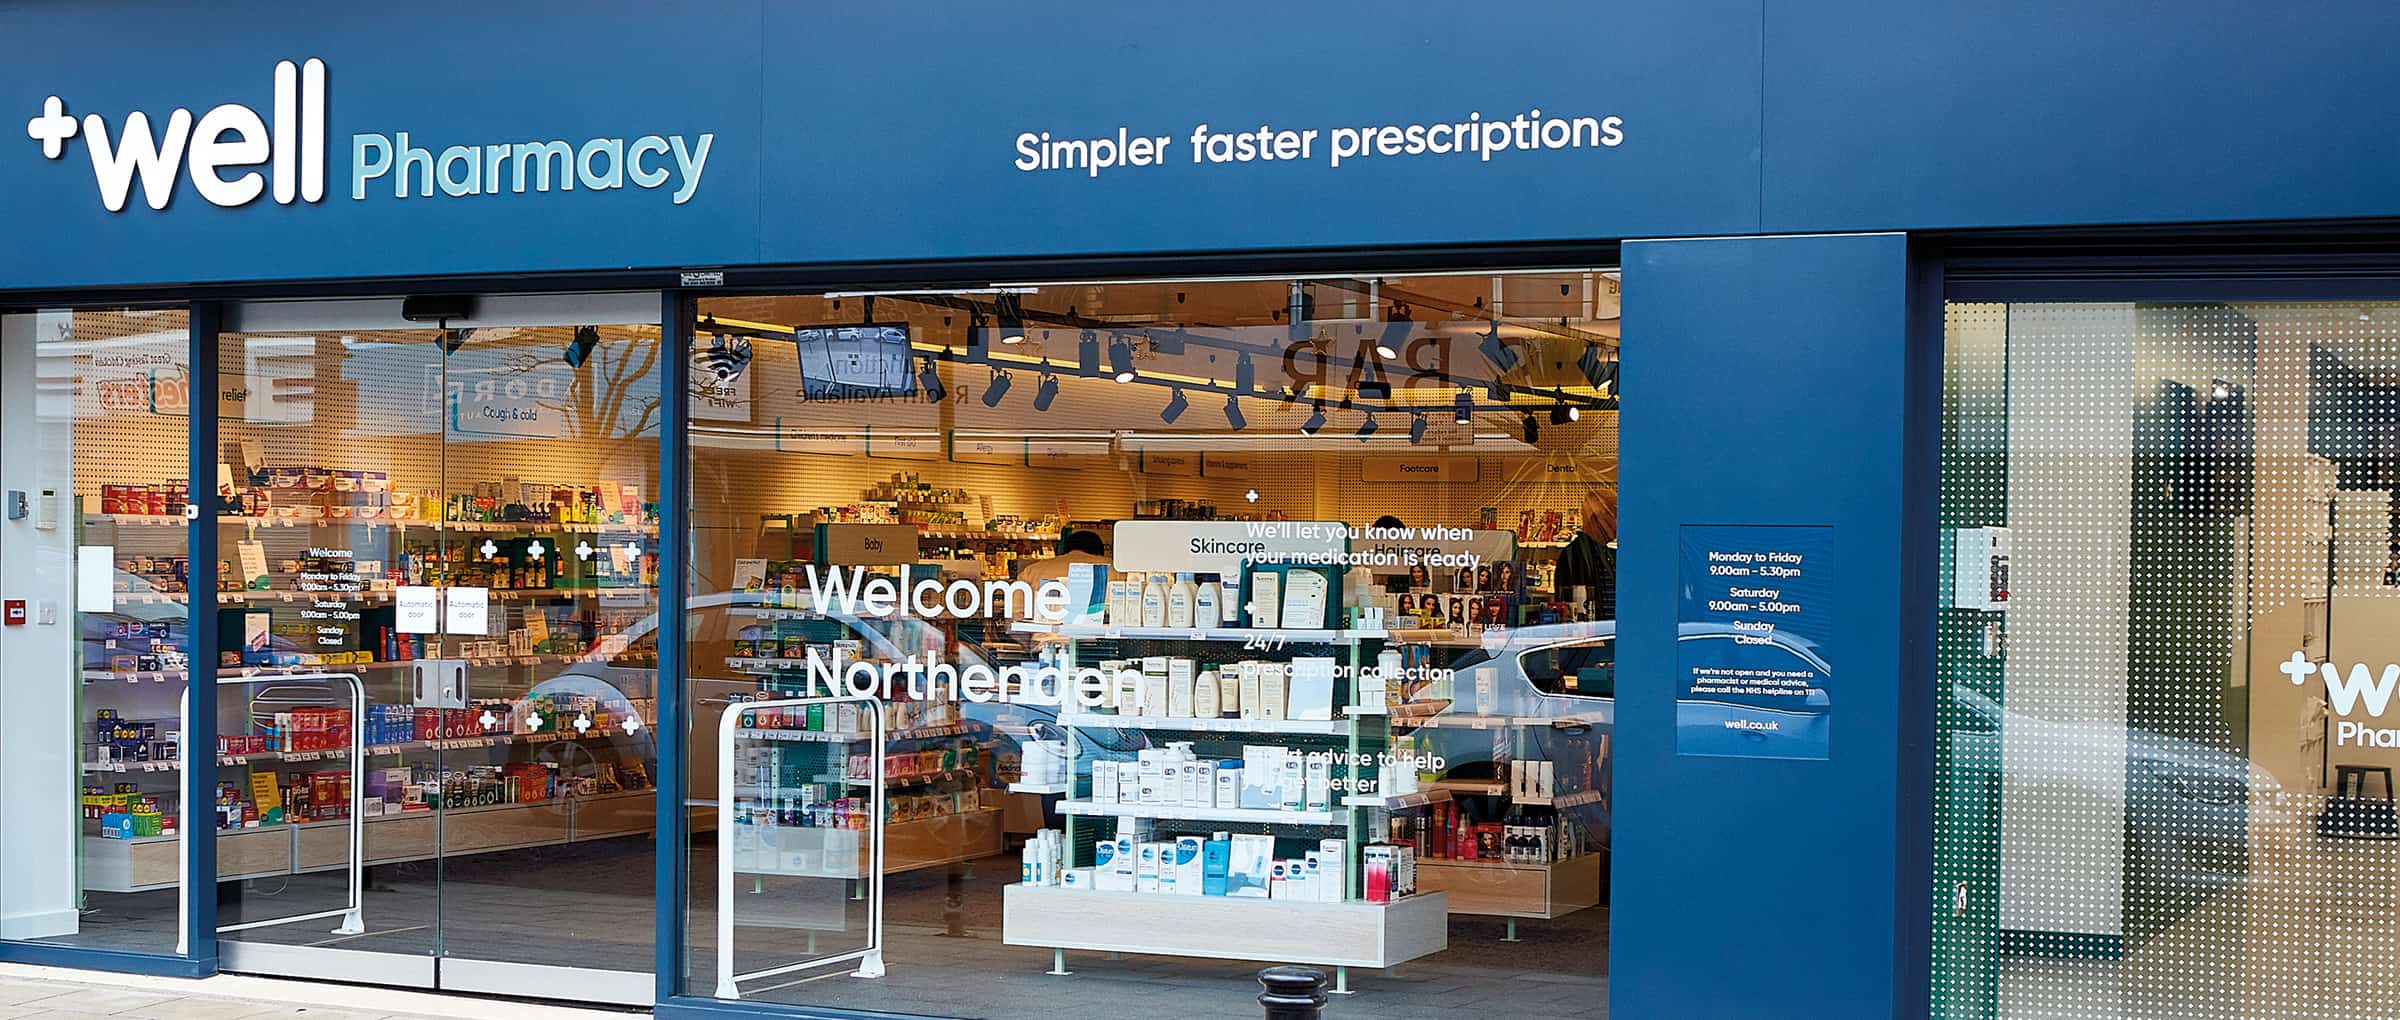 Well Pharmacy shop front